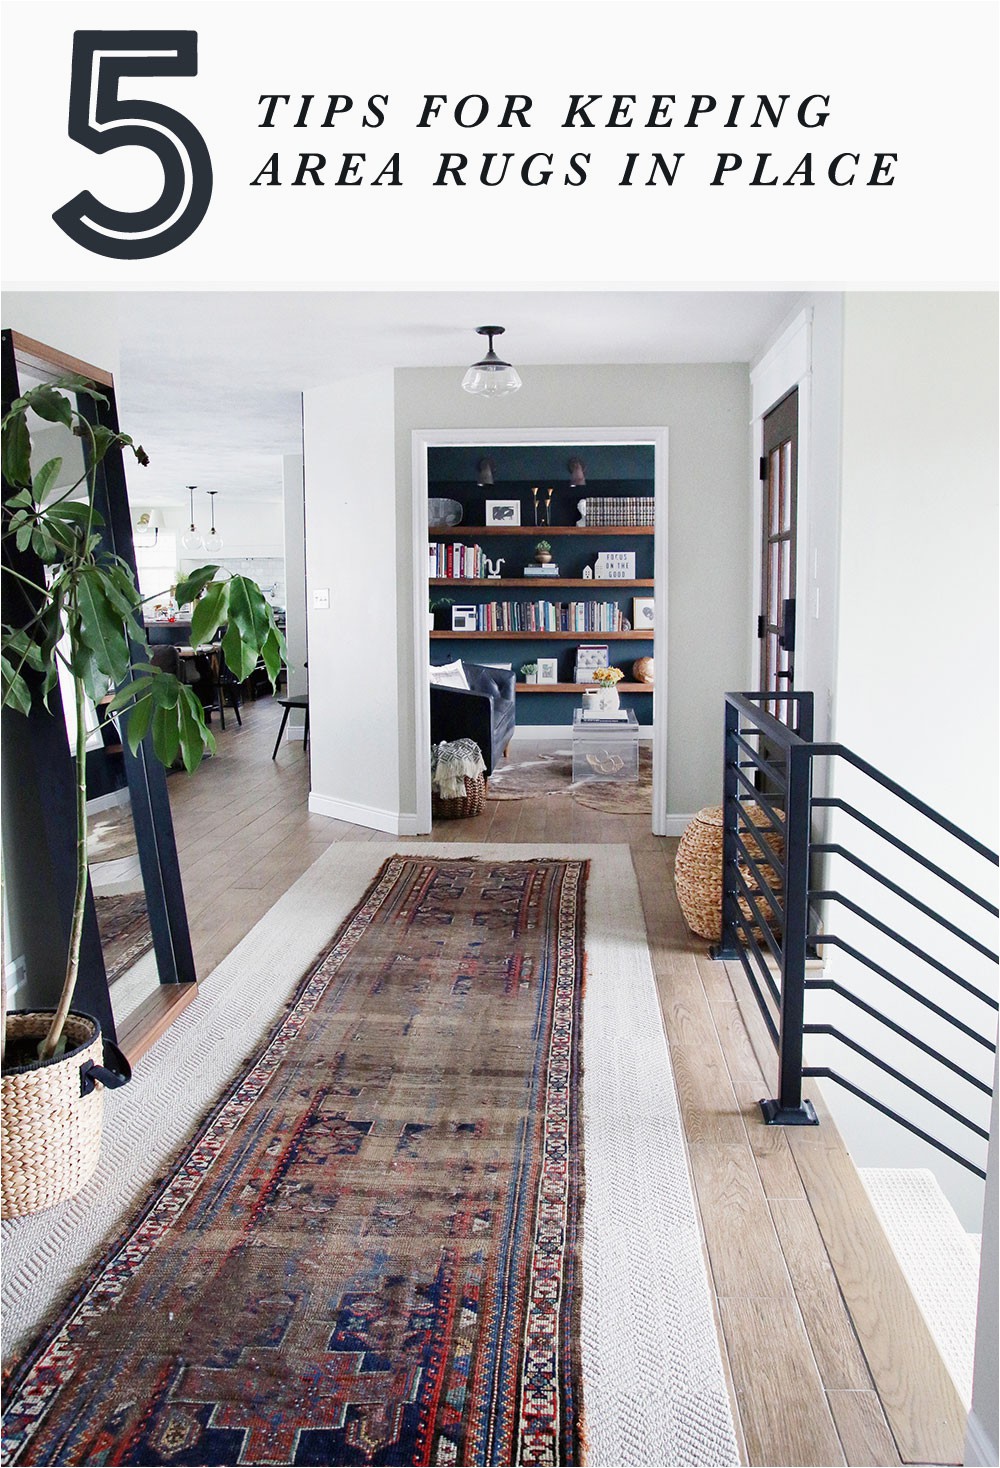 Secure area Rug to Wood Floor 5 Tips for Keeping area Rugs Exactly where You Want them